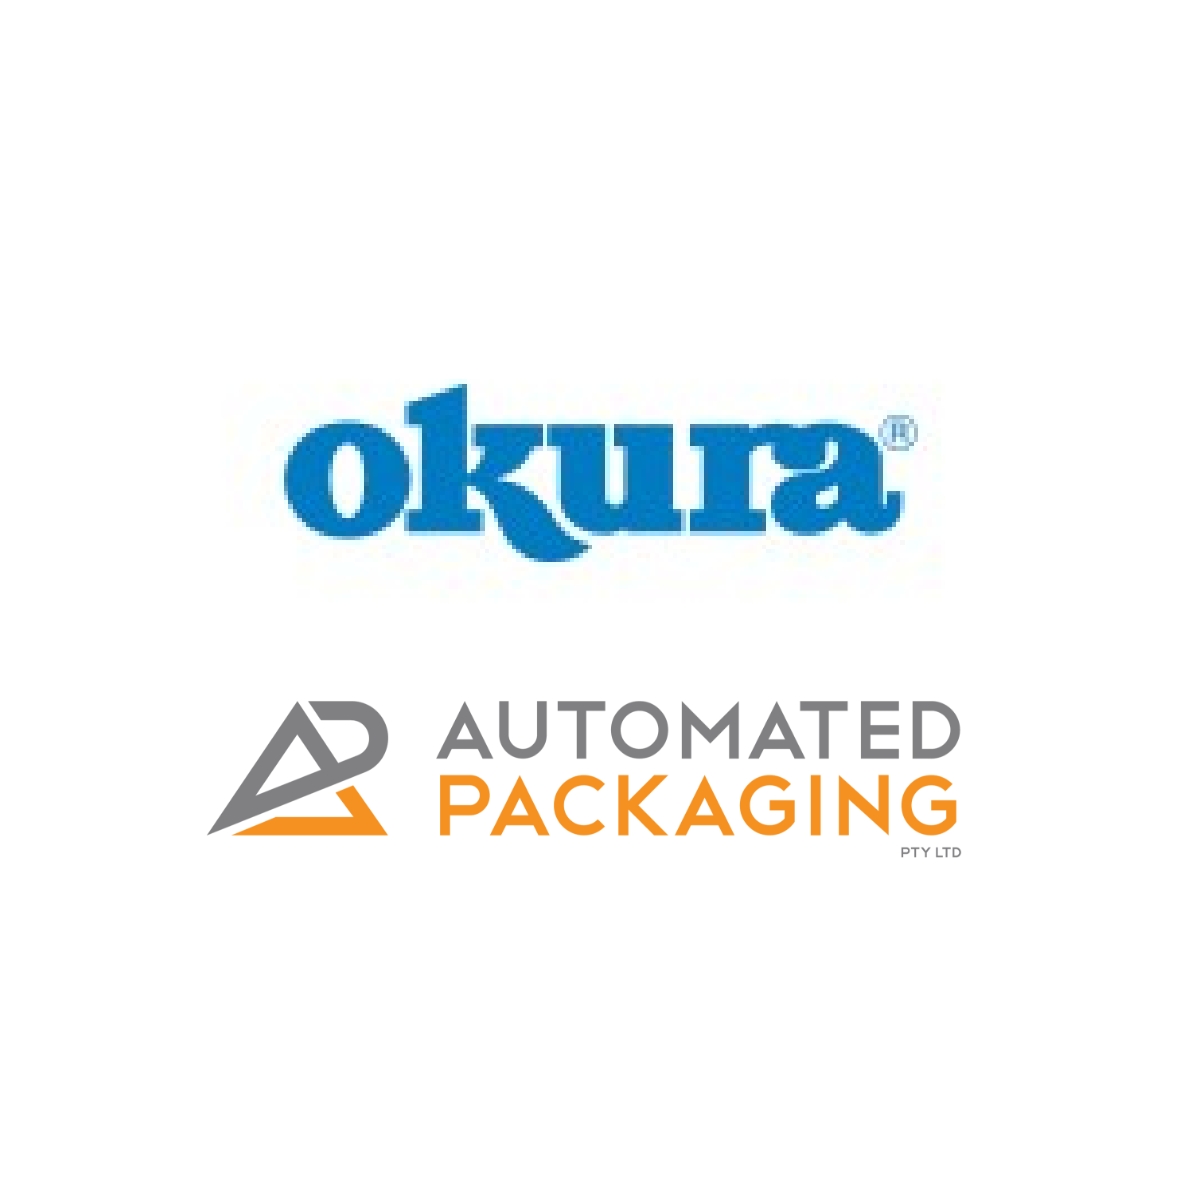 Announcing The Strategic Partnership Between Okura And Automated